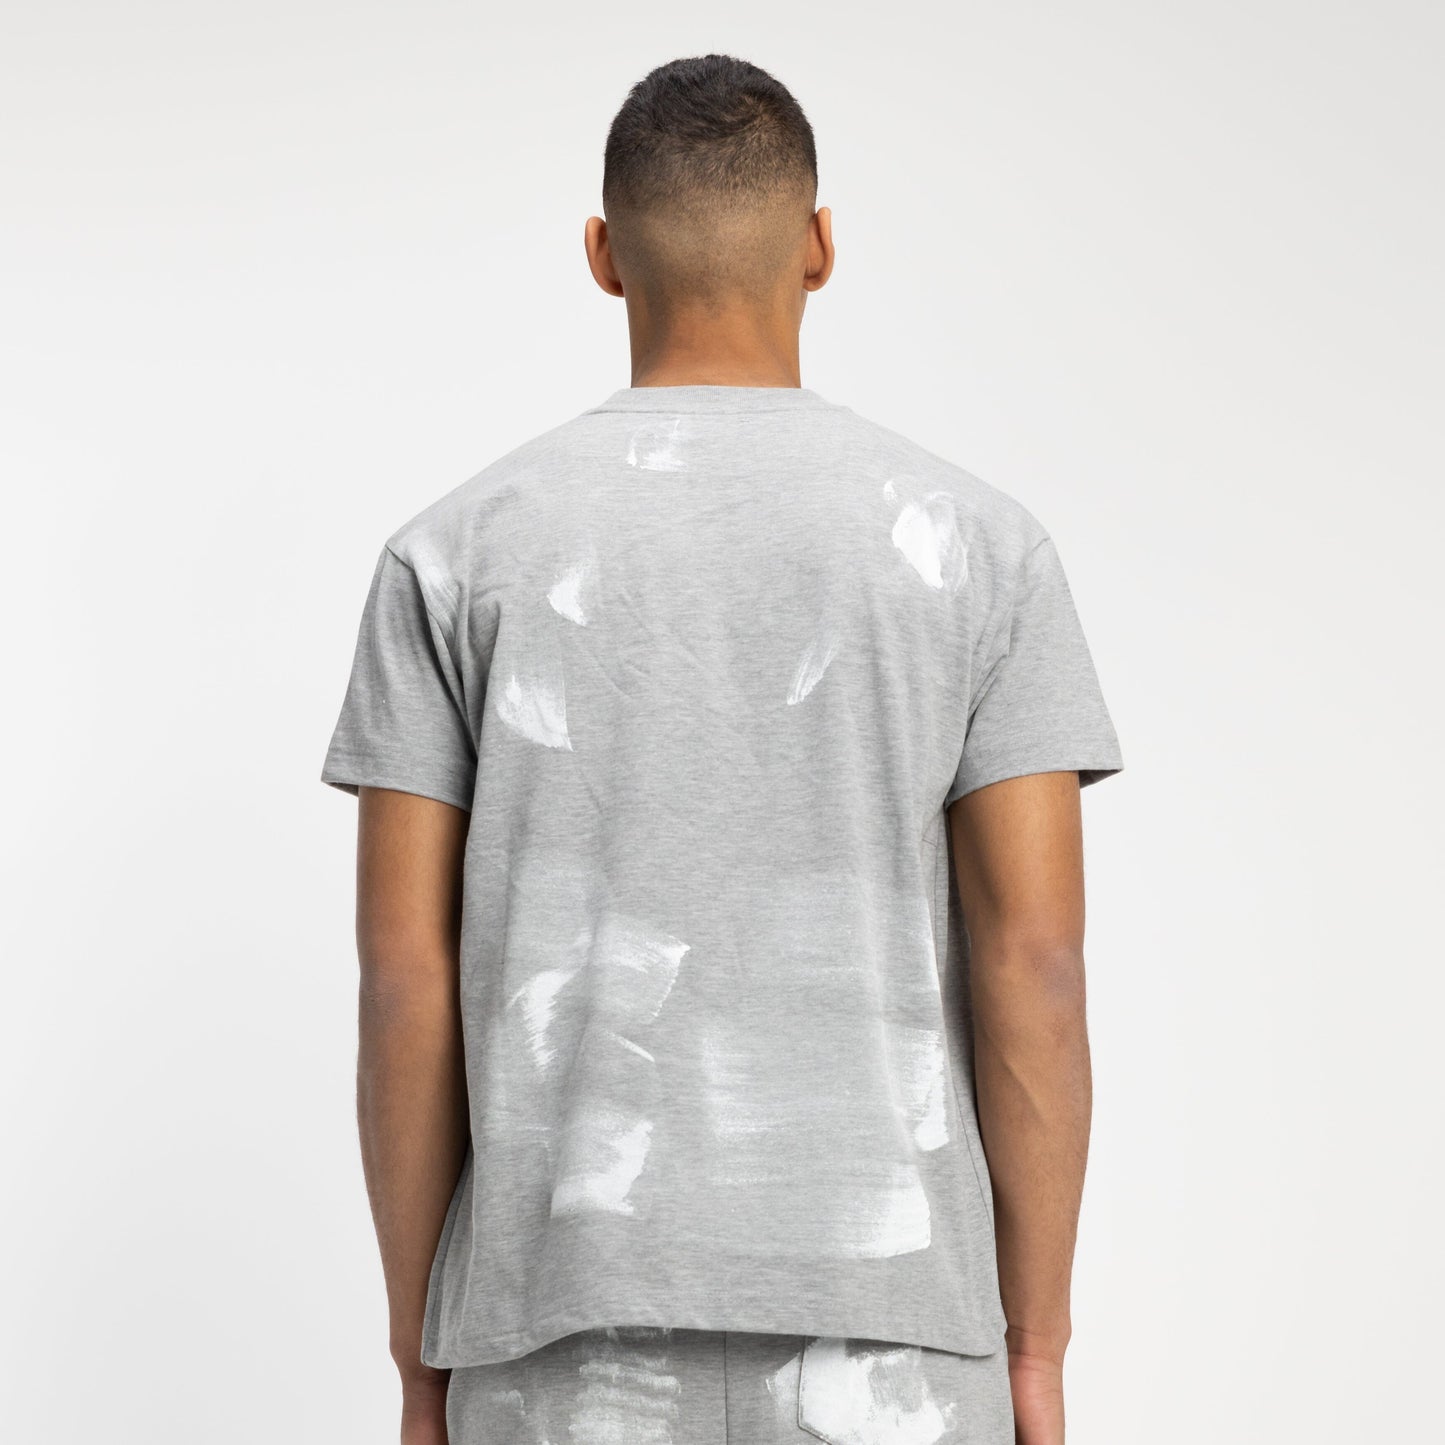 'Atelier' T-Shirt with Paint Stains in Grey